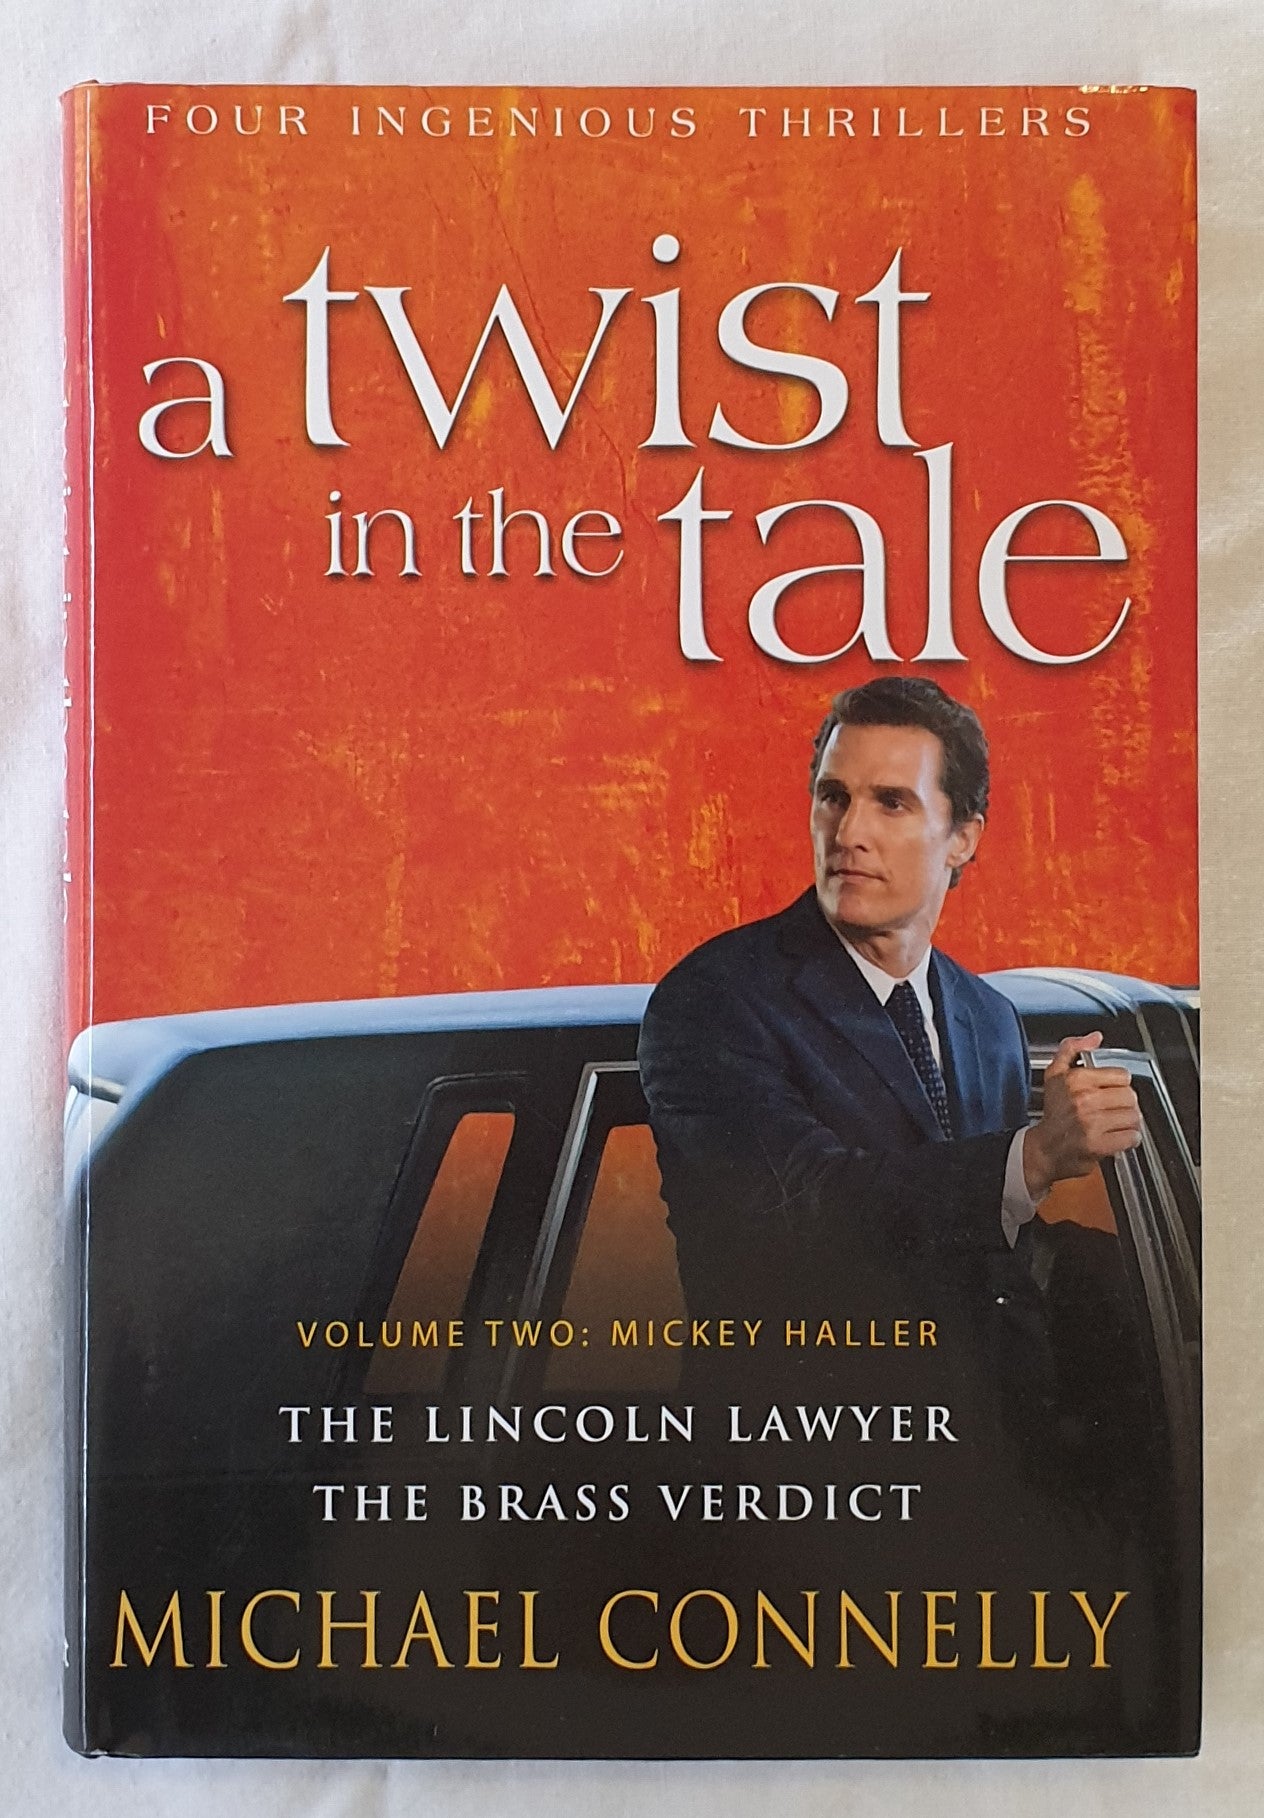 A Twist in the Tale  Volume Two: Mickey Haller The Lincoln Lawyer – The Brass Verdict by Michael Connelly